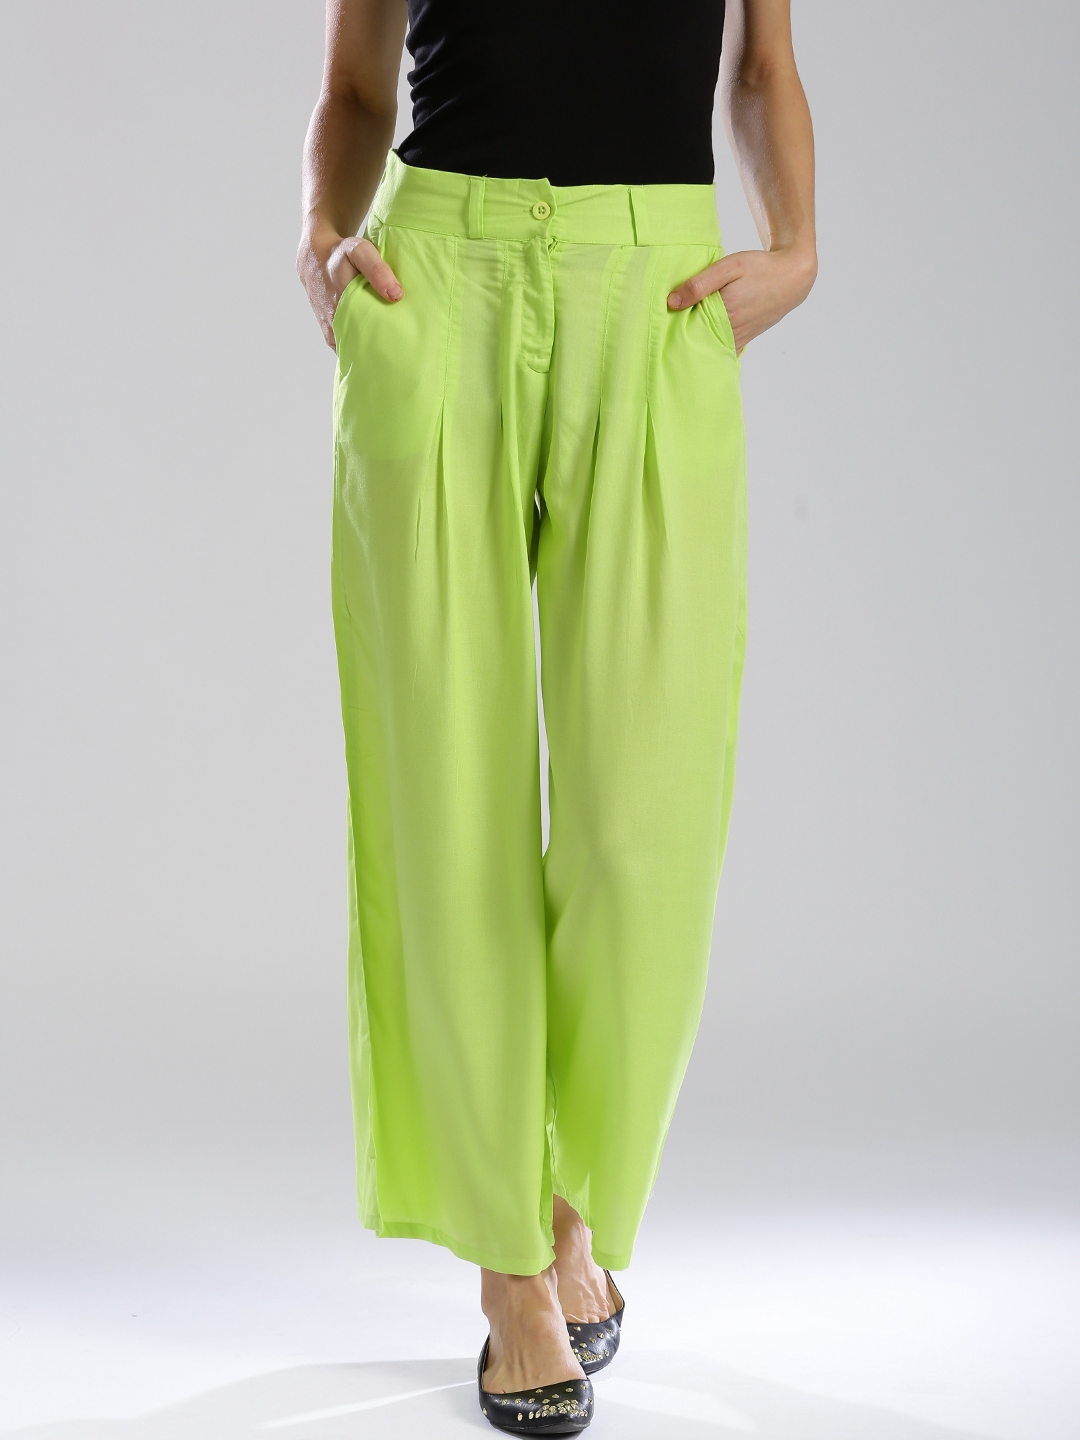 Buy W Lime Green Palazzo Trousers - Palazzos for Women 1308567 | Myntra